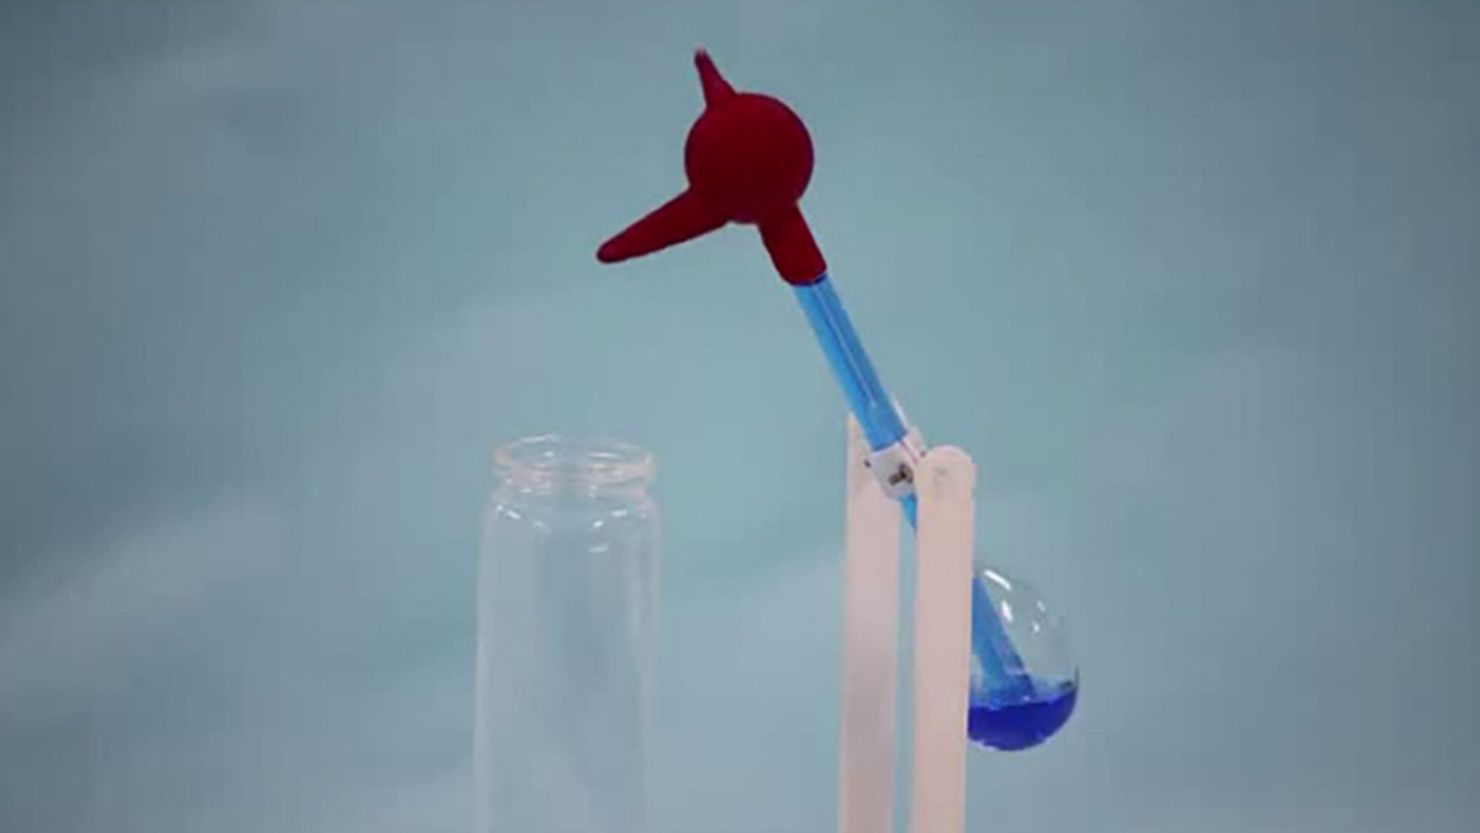  A new electricity generator inspired by the 'drinking bird toy'.